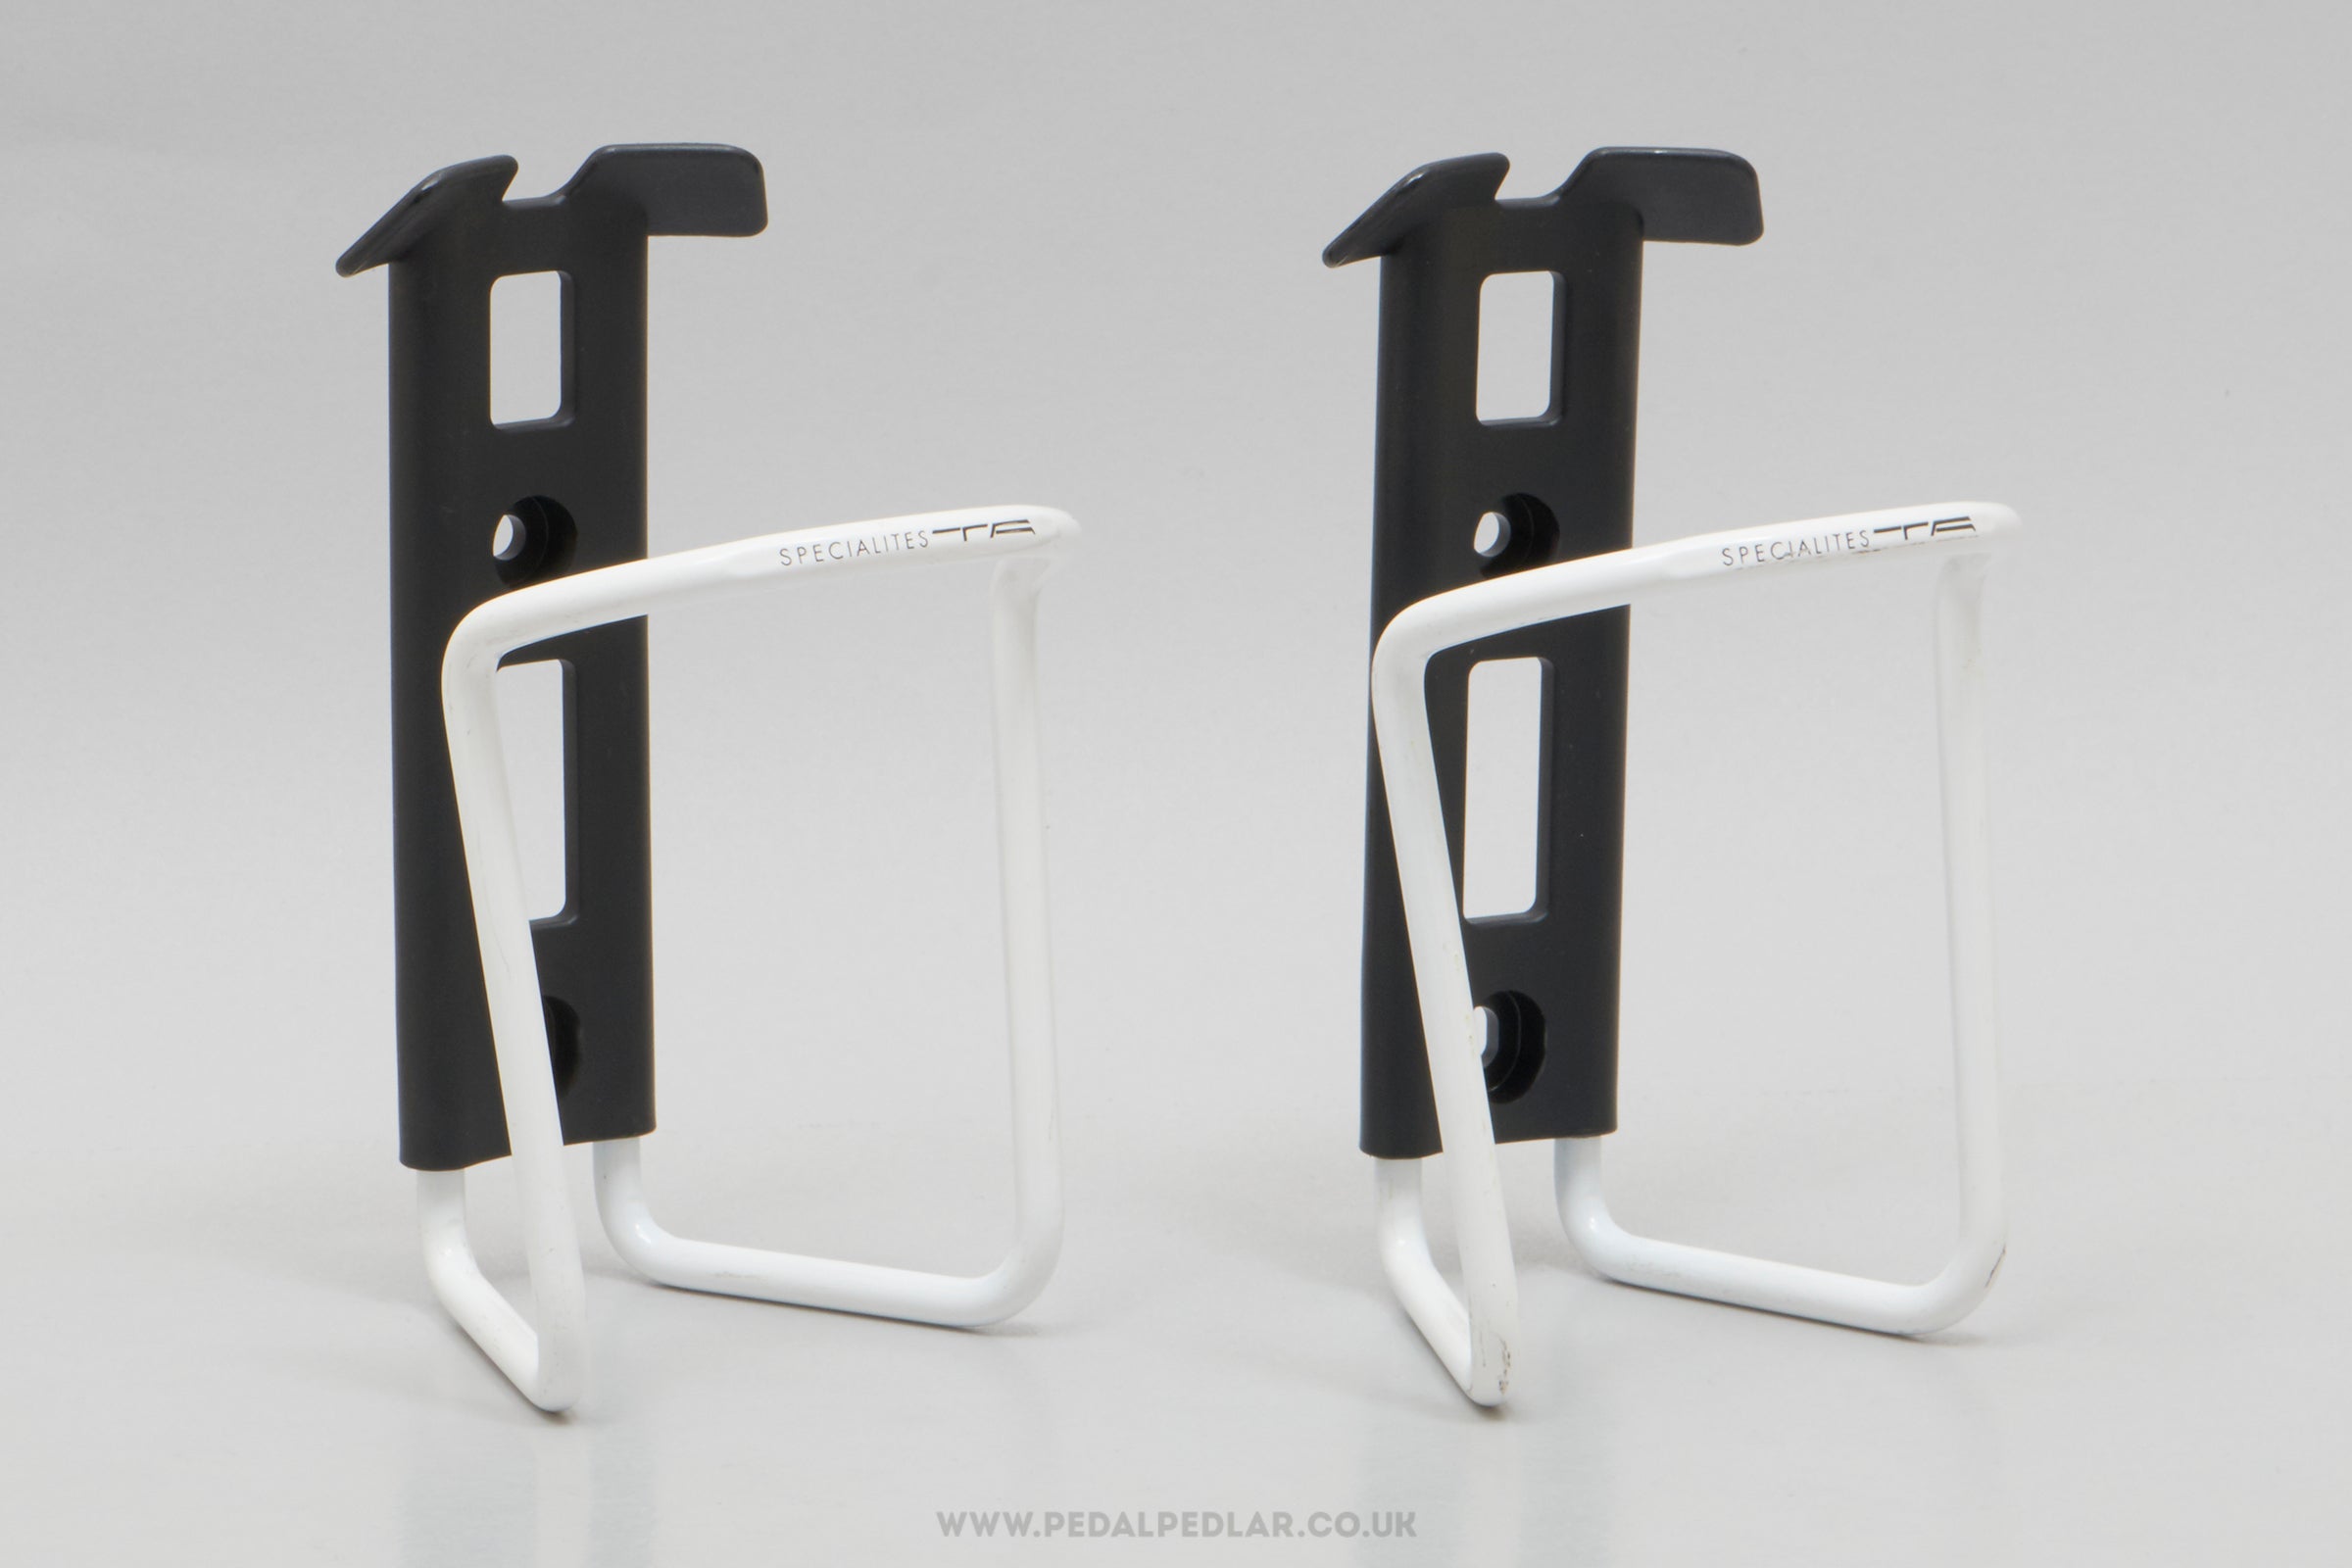 Specialites T.A. Sierra NOS Classic White Bottle Cages - Pedal Pedlar - Buy New Old Stock Cycle Accessories